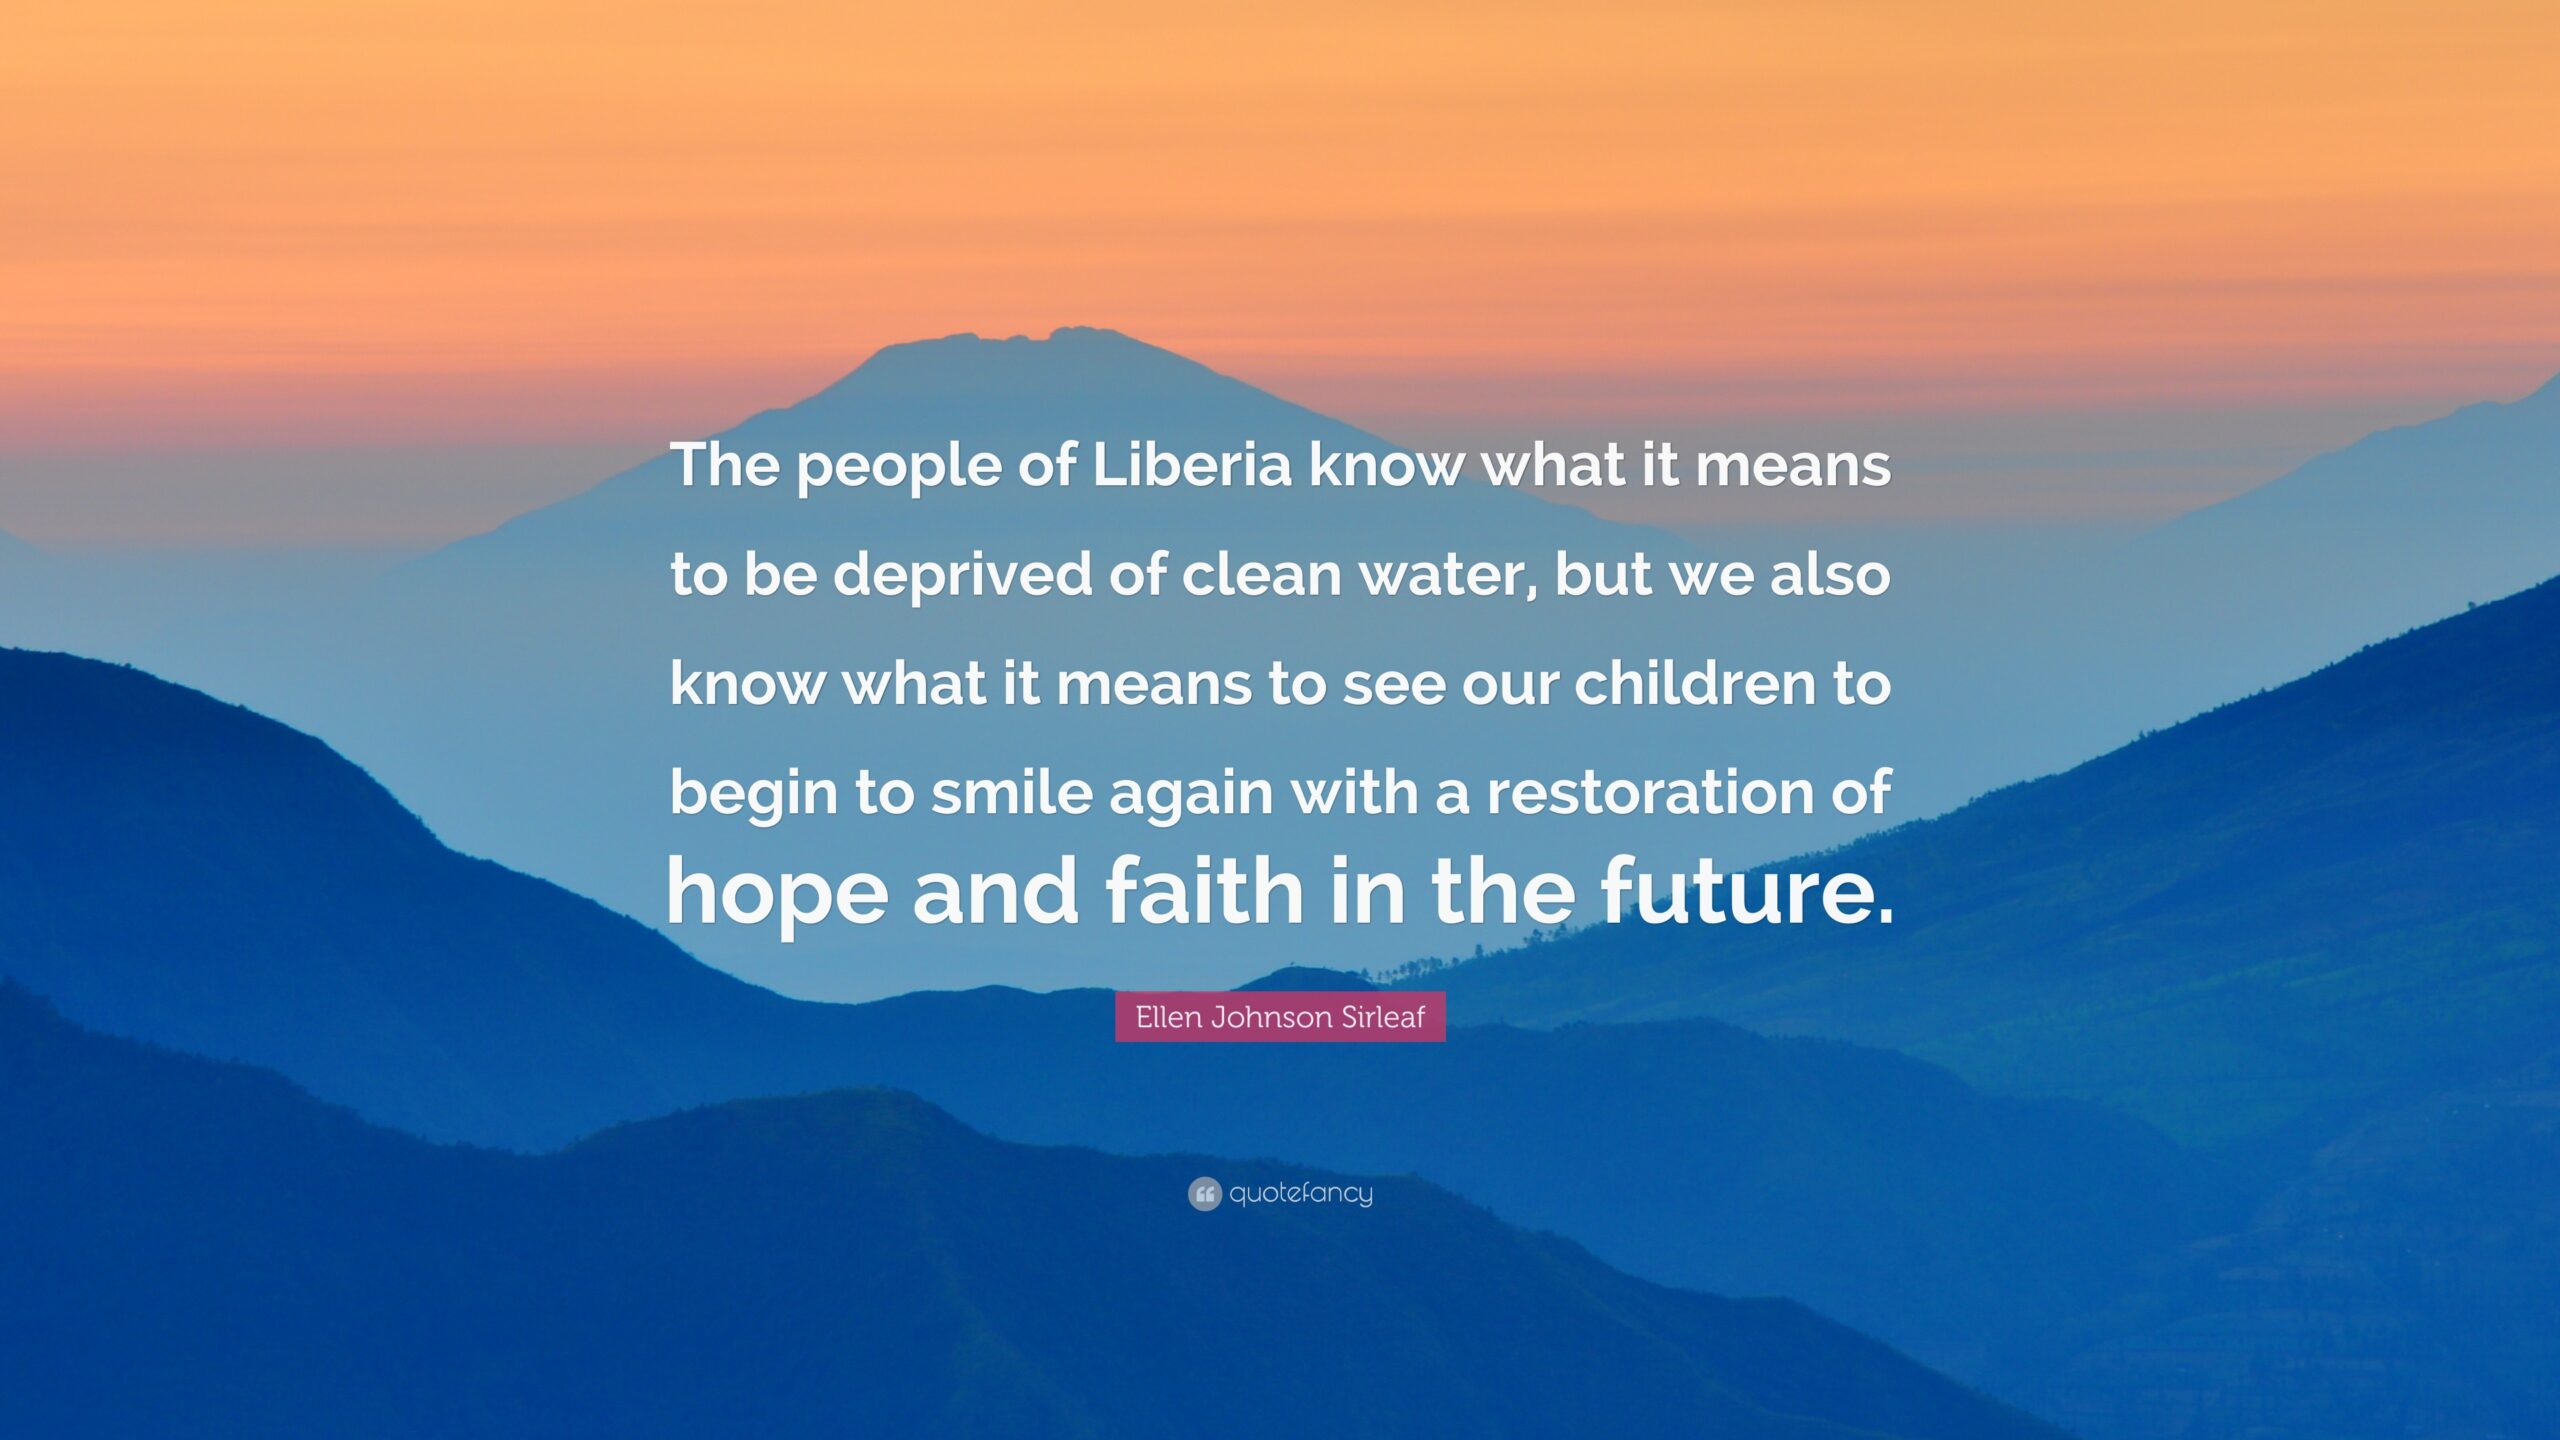 Ellen Johnson Sirleaf Quote “The people of Liberia know what it